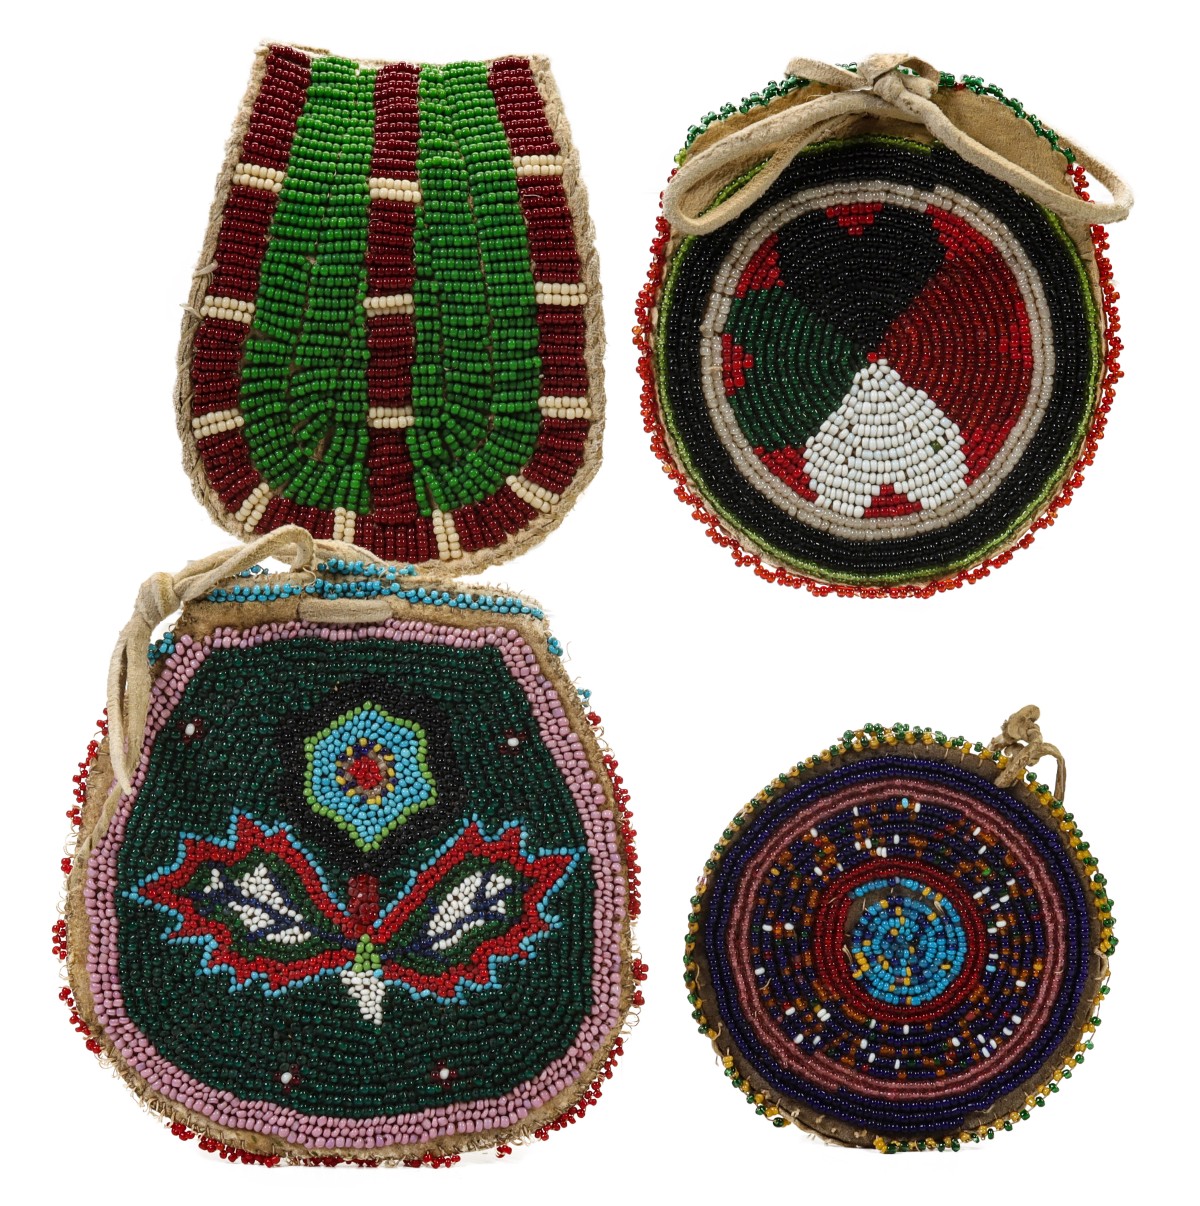 FOUR NATIVE AMERICAN BEADED POUCHES